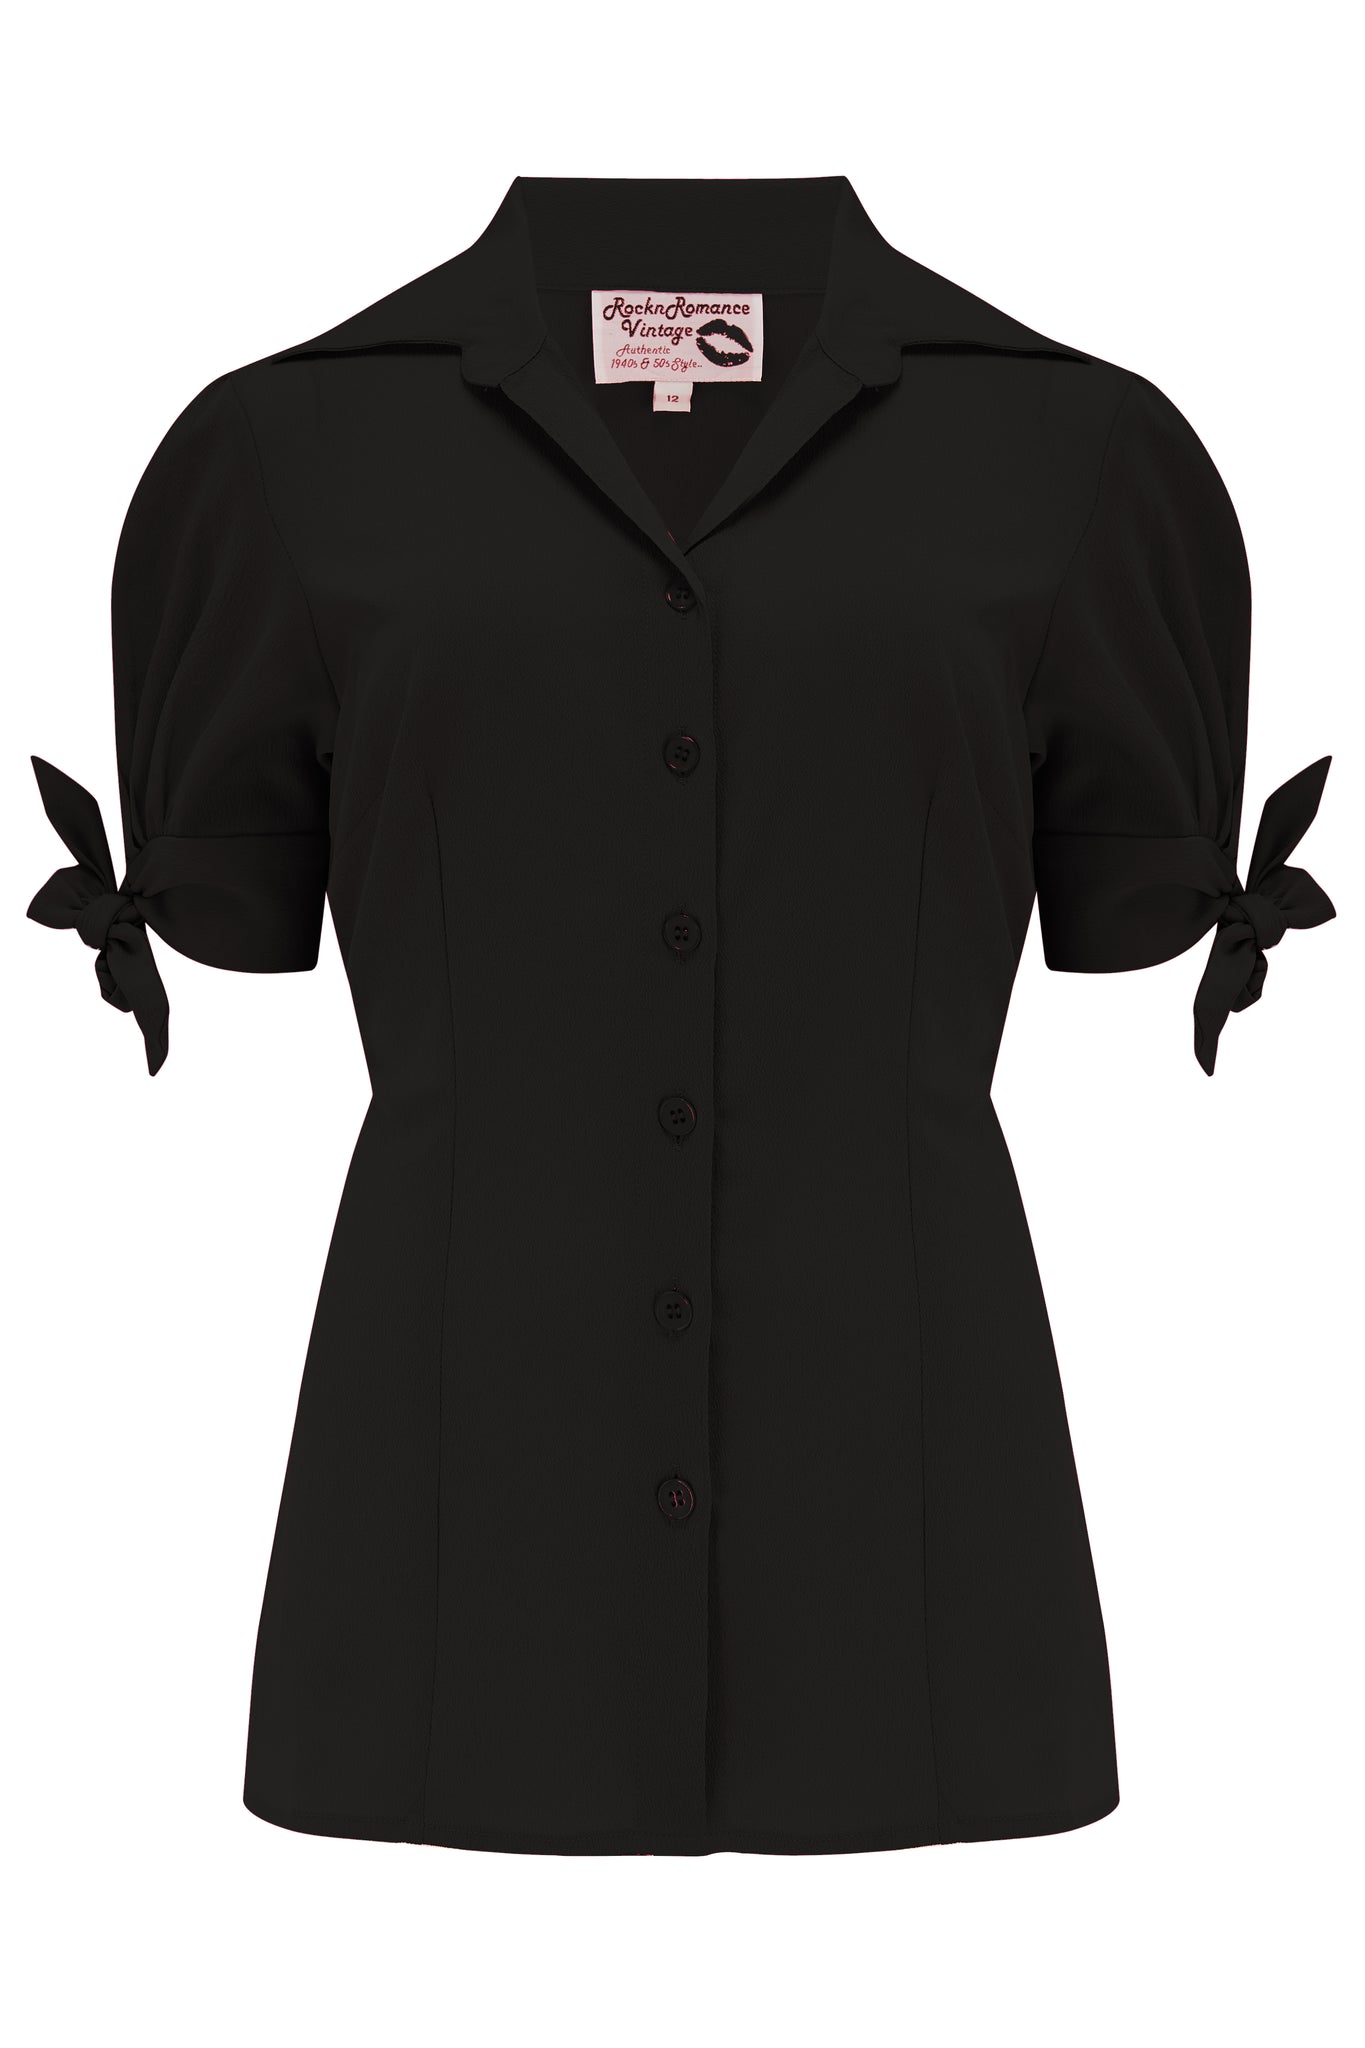 **Sample Sale** The "Jane" Blouse in Solid Black, True & Authentic 1950s Vintage Style - True and authentic vintage style clothing, inspired by the Classic styles of CC41 , WW2 and the fun 1950s RocknRoll era, for everyday wear plus events like Goodwood Revival, Twinwood Festival and Viva Las Vegas Rockabilly Weekend Rock n Romance Rock n Romance